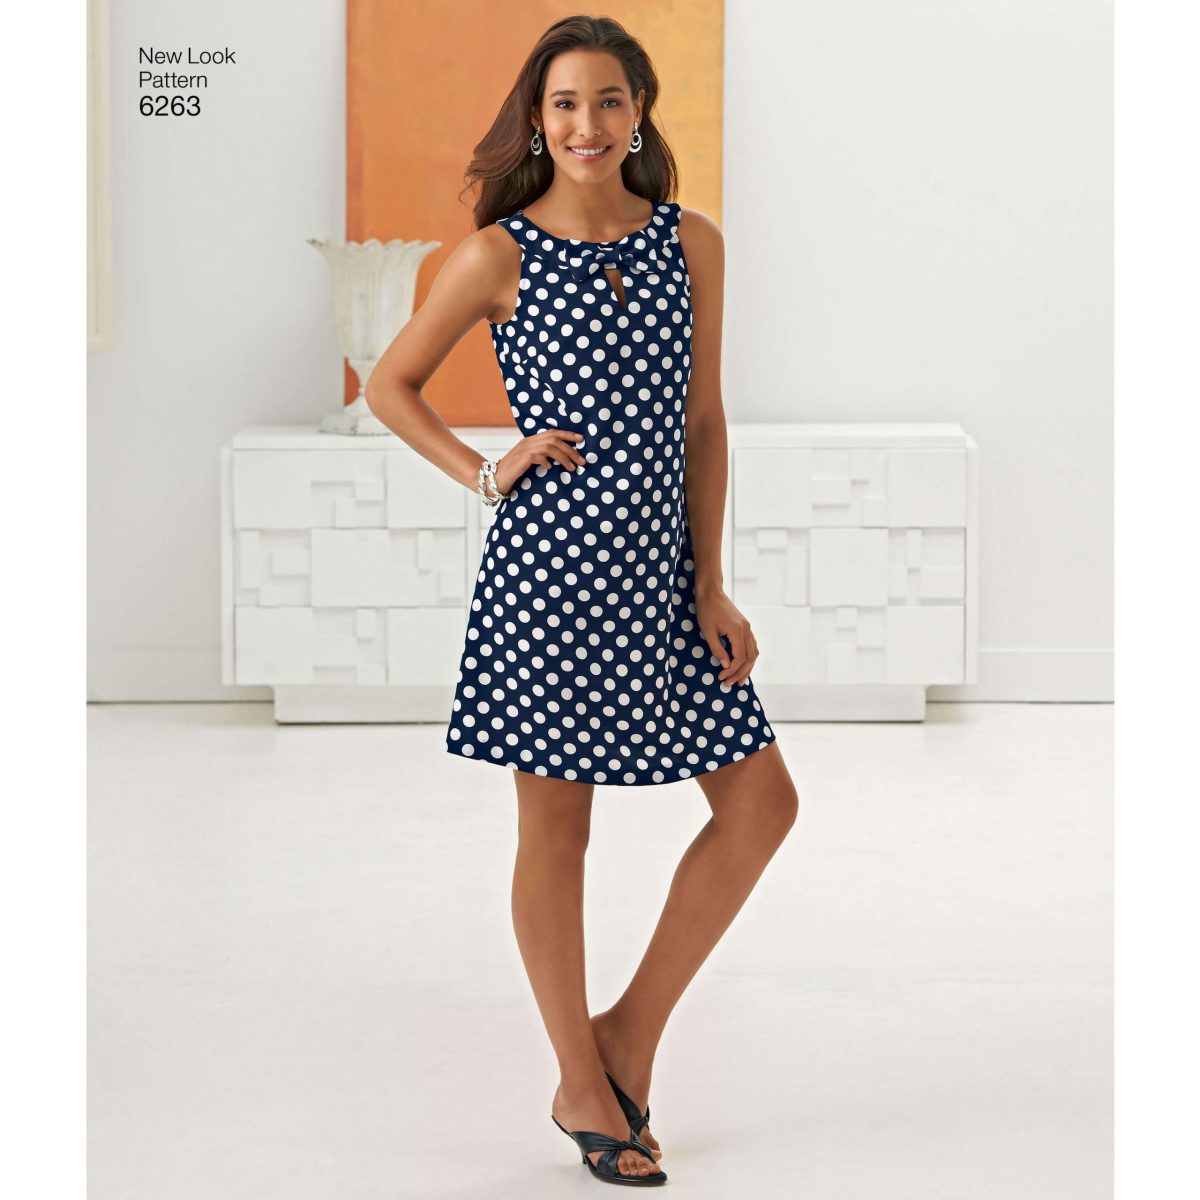 New Look Sewing Pattern N6263 Misses' A- Line Dress